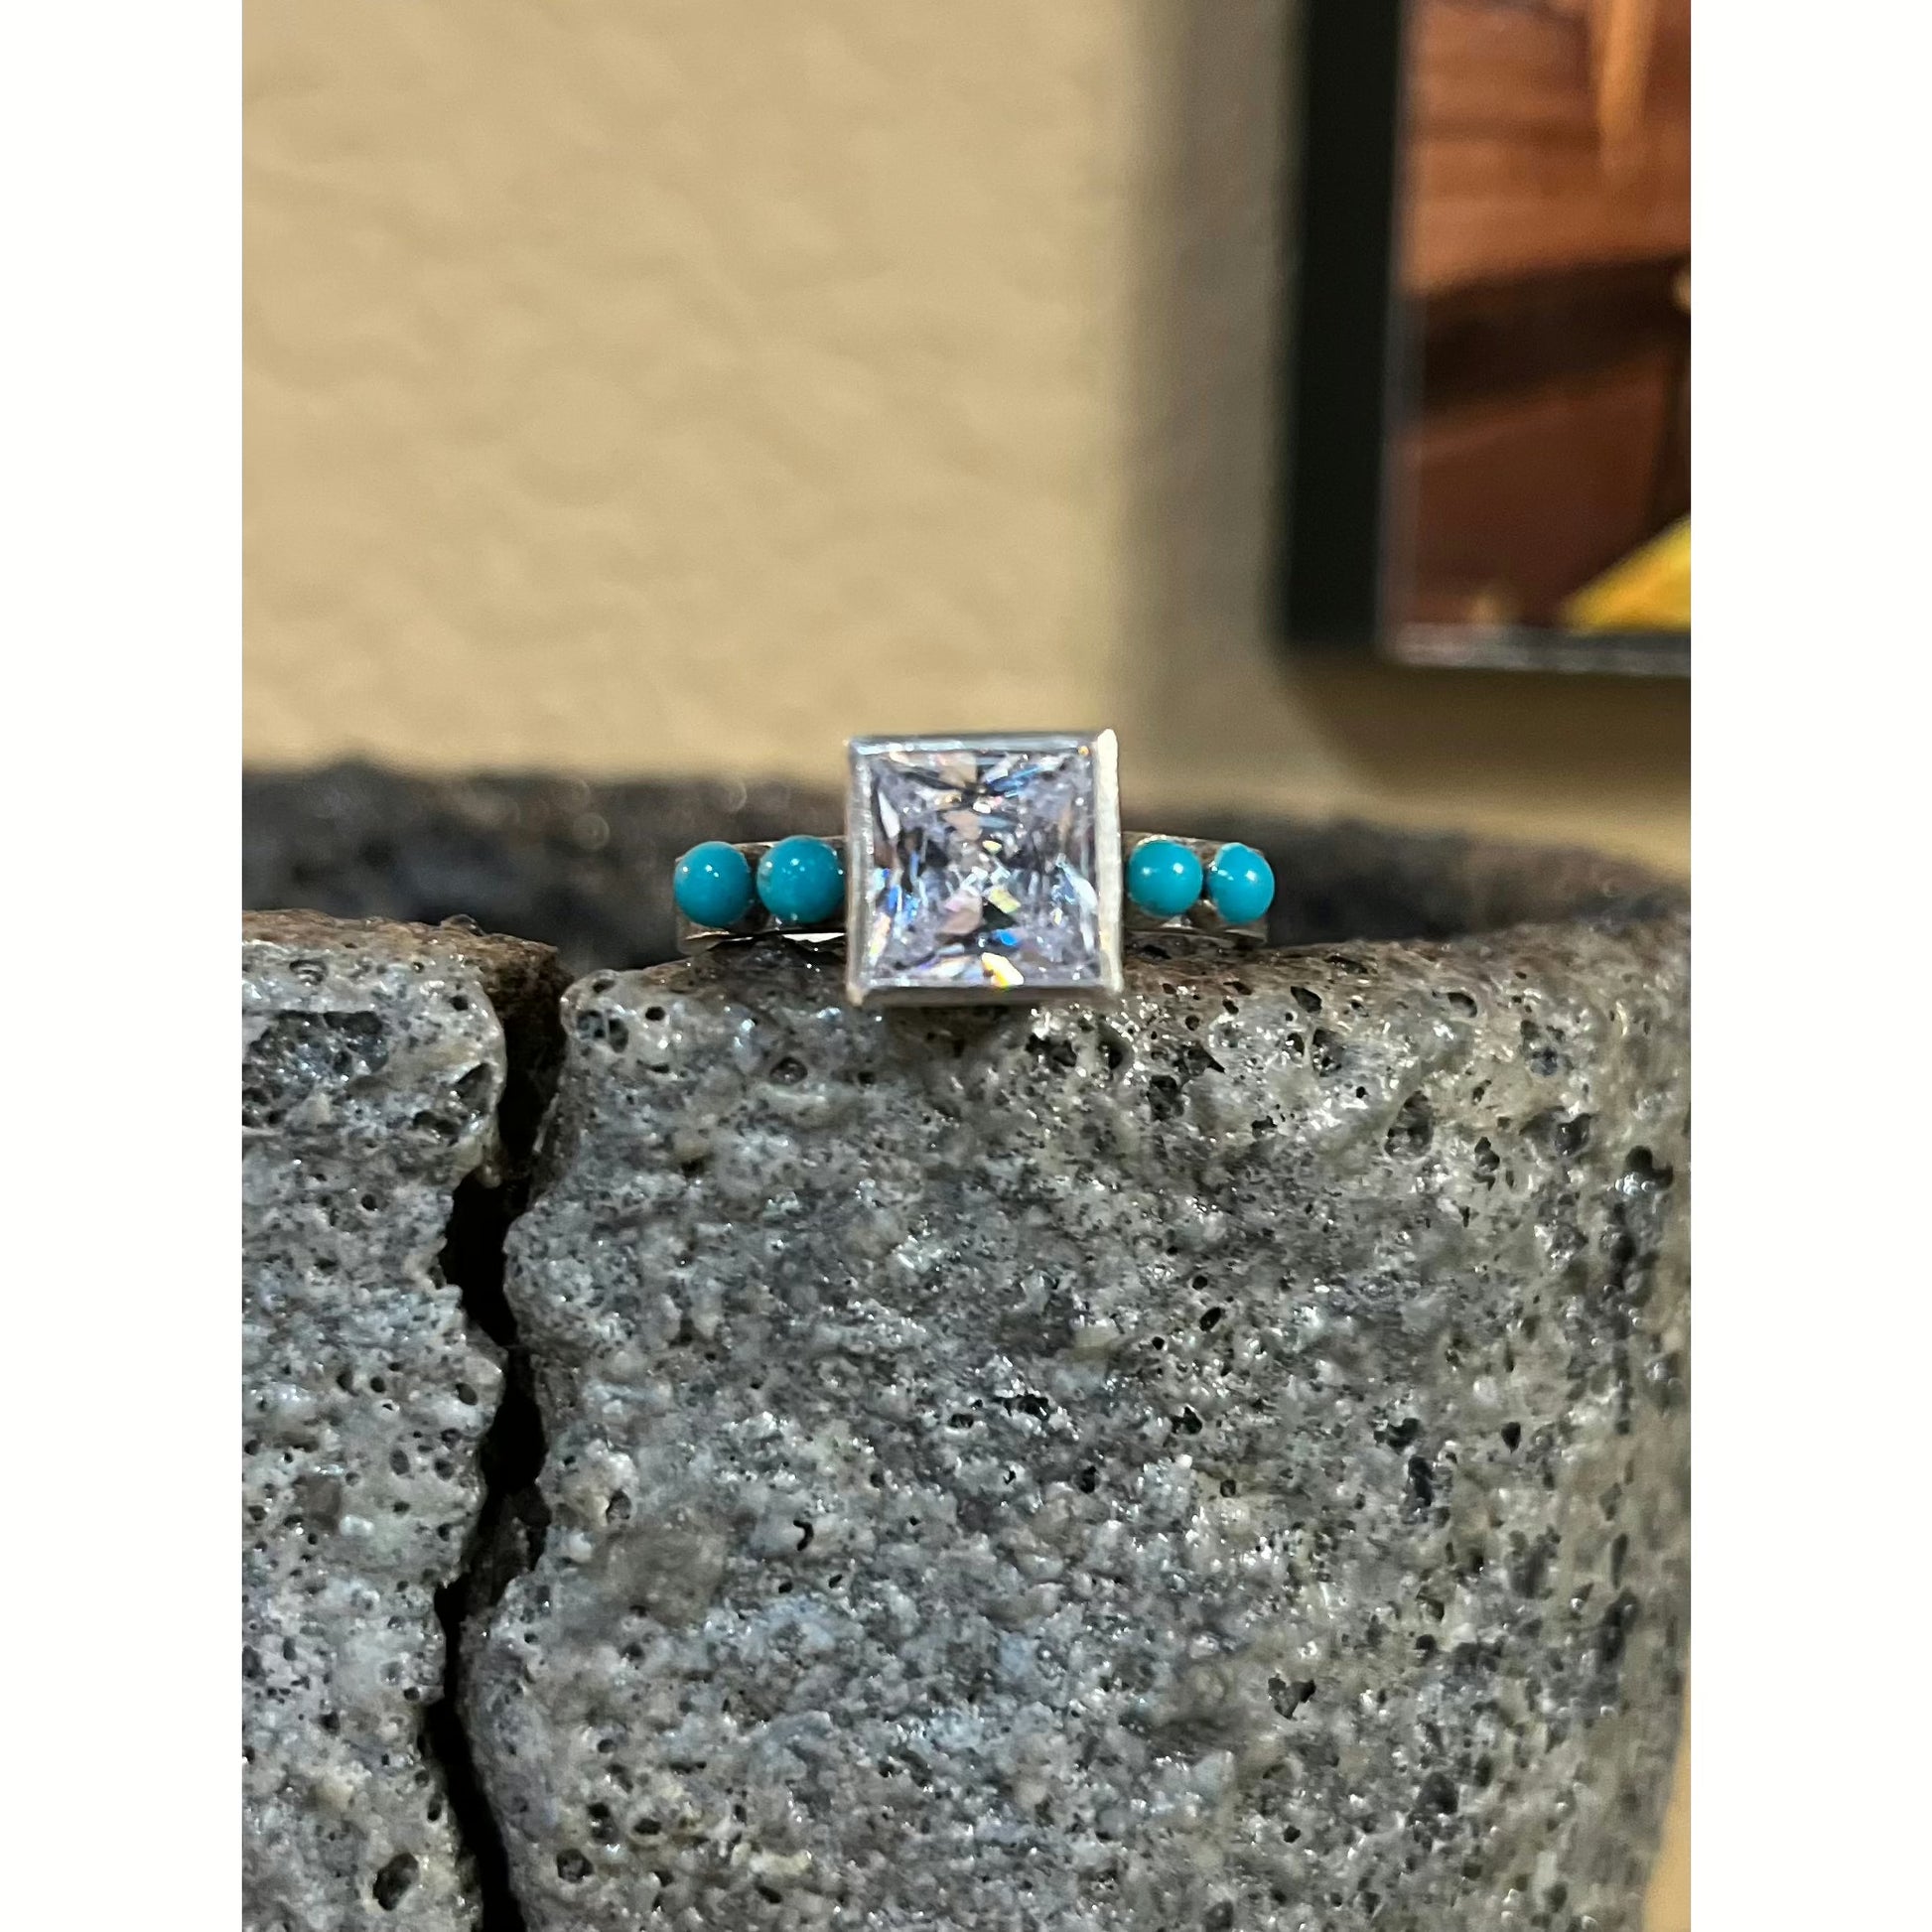 Rockin' Out's Kora is very similar to our Koriel except it has more of a western style!  Featuring an 8mm square Cubic Zirconium Stone with turquoise inlay on each side of the stone.